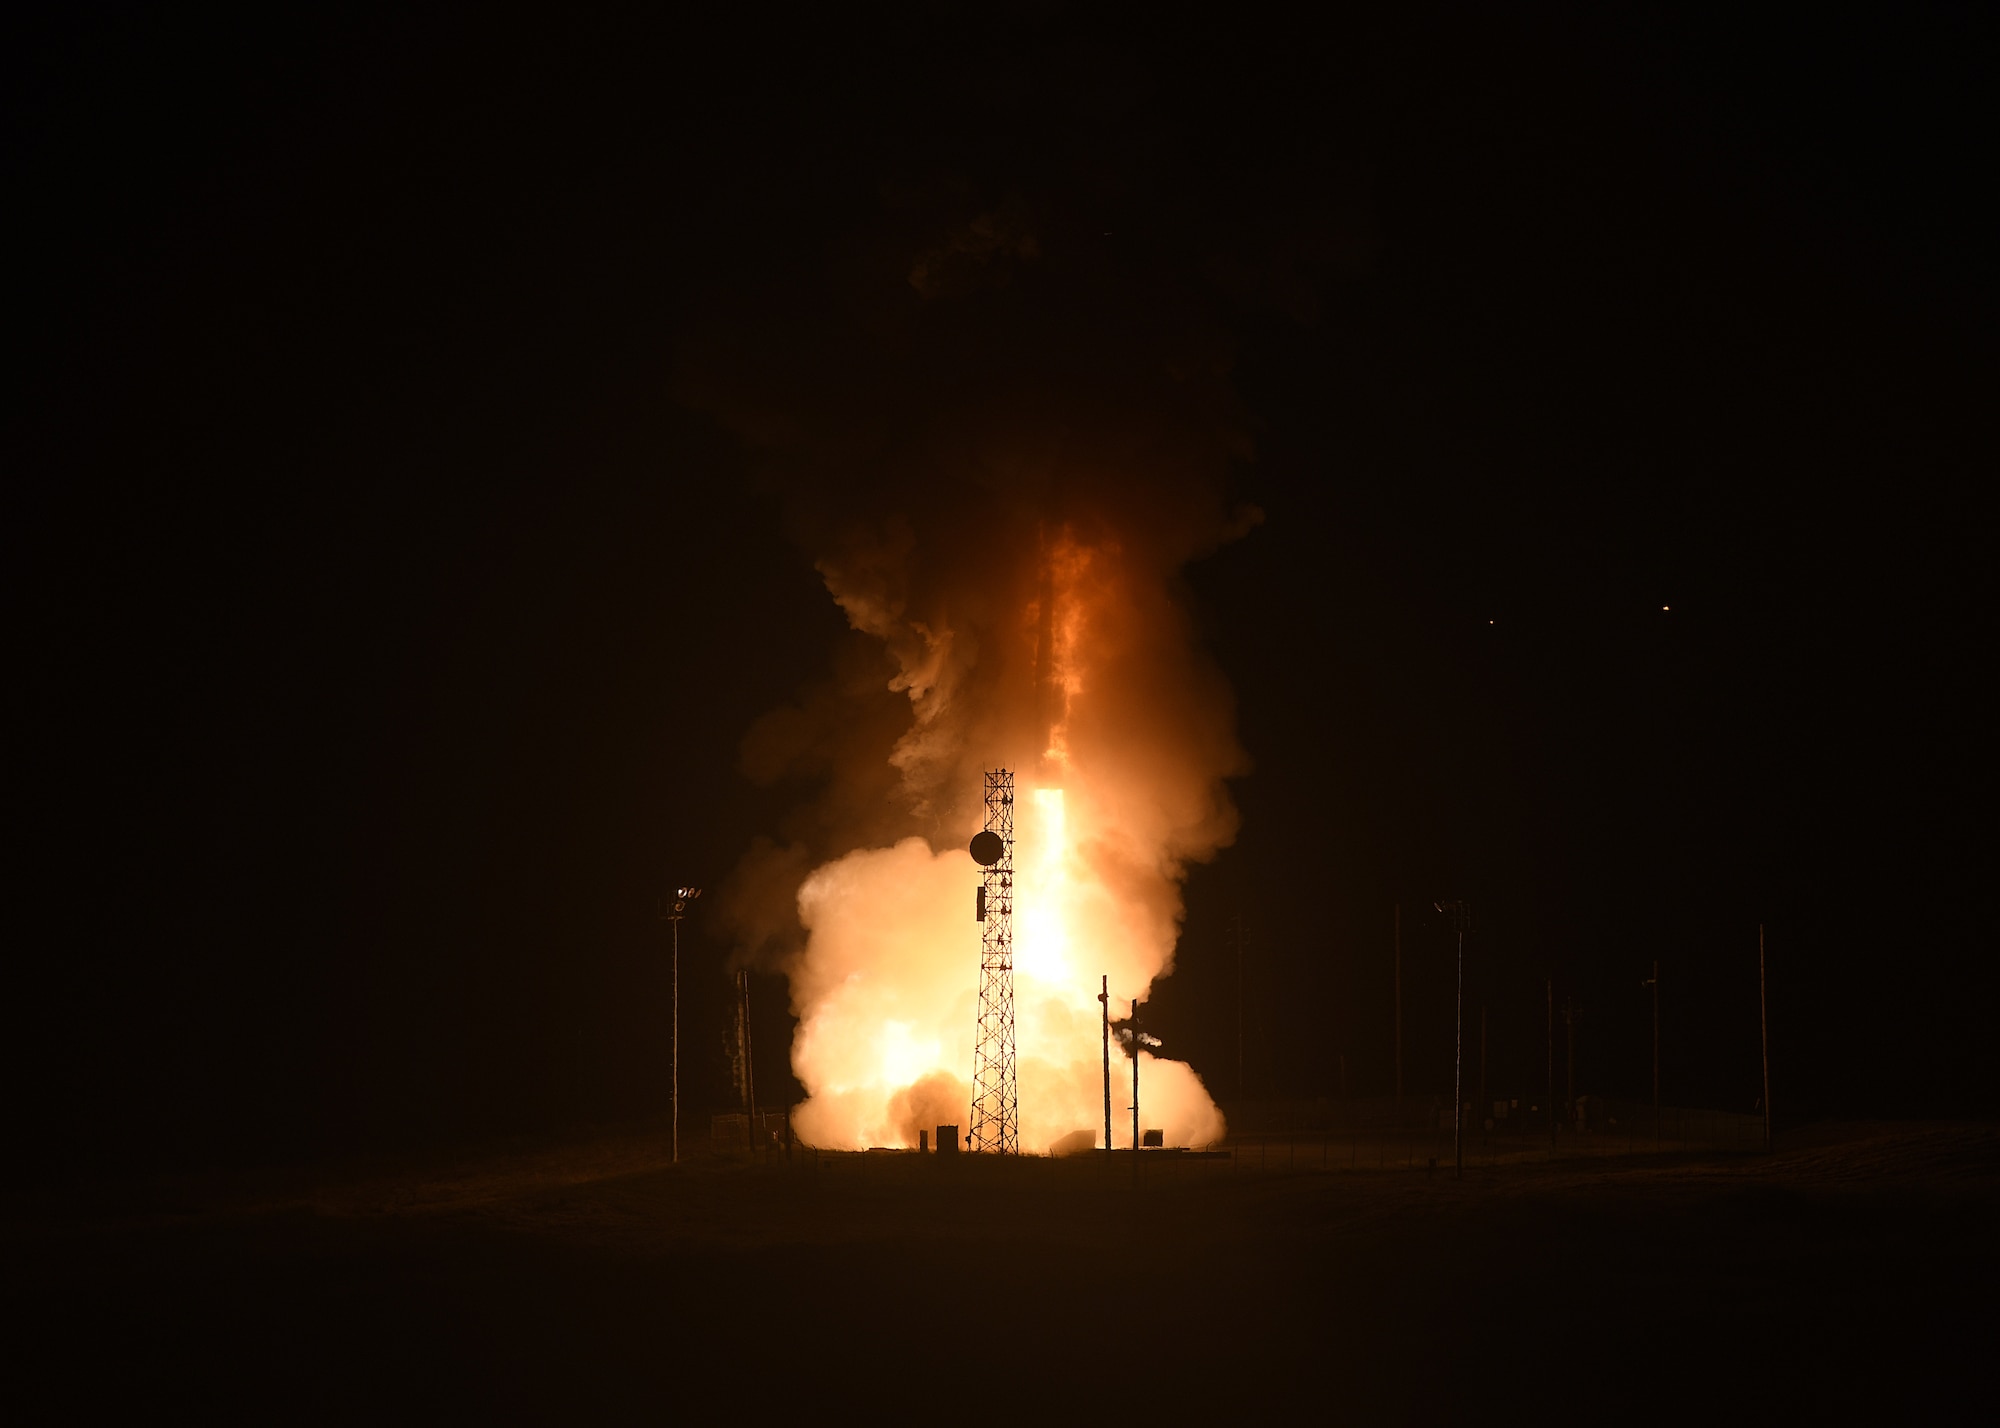 An unarmed Minuteman III intercontinental ballistic missile launches during an operational test at 2:42 A.M. Pacific Time May 1, 2019, at Vandenberg Air Force Base, Calif. (U.S. Air Force photo by Staff Sgt. Brittany E. N. Murphy)